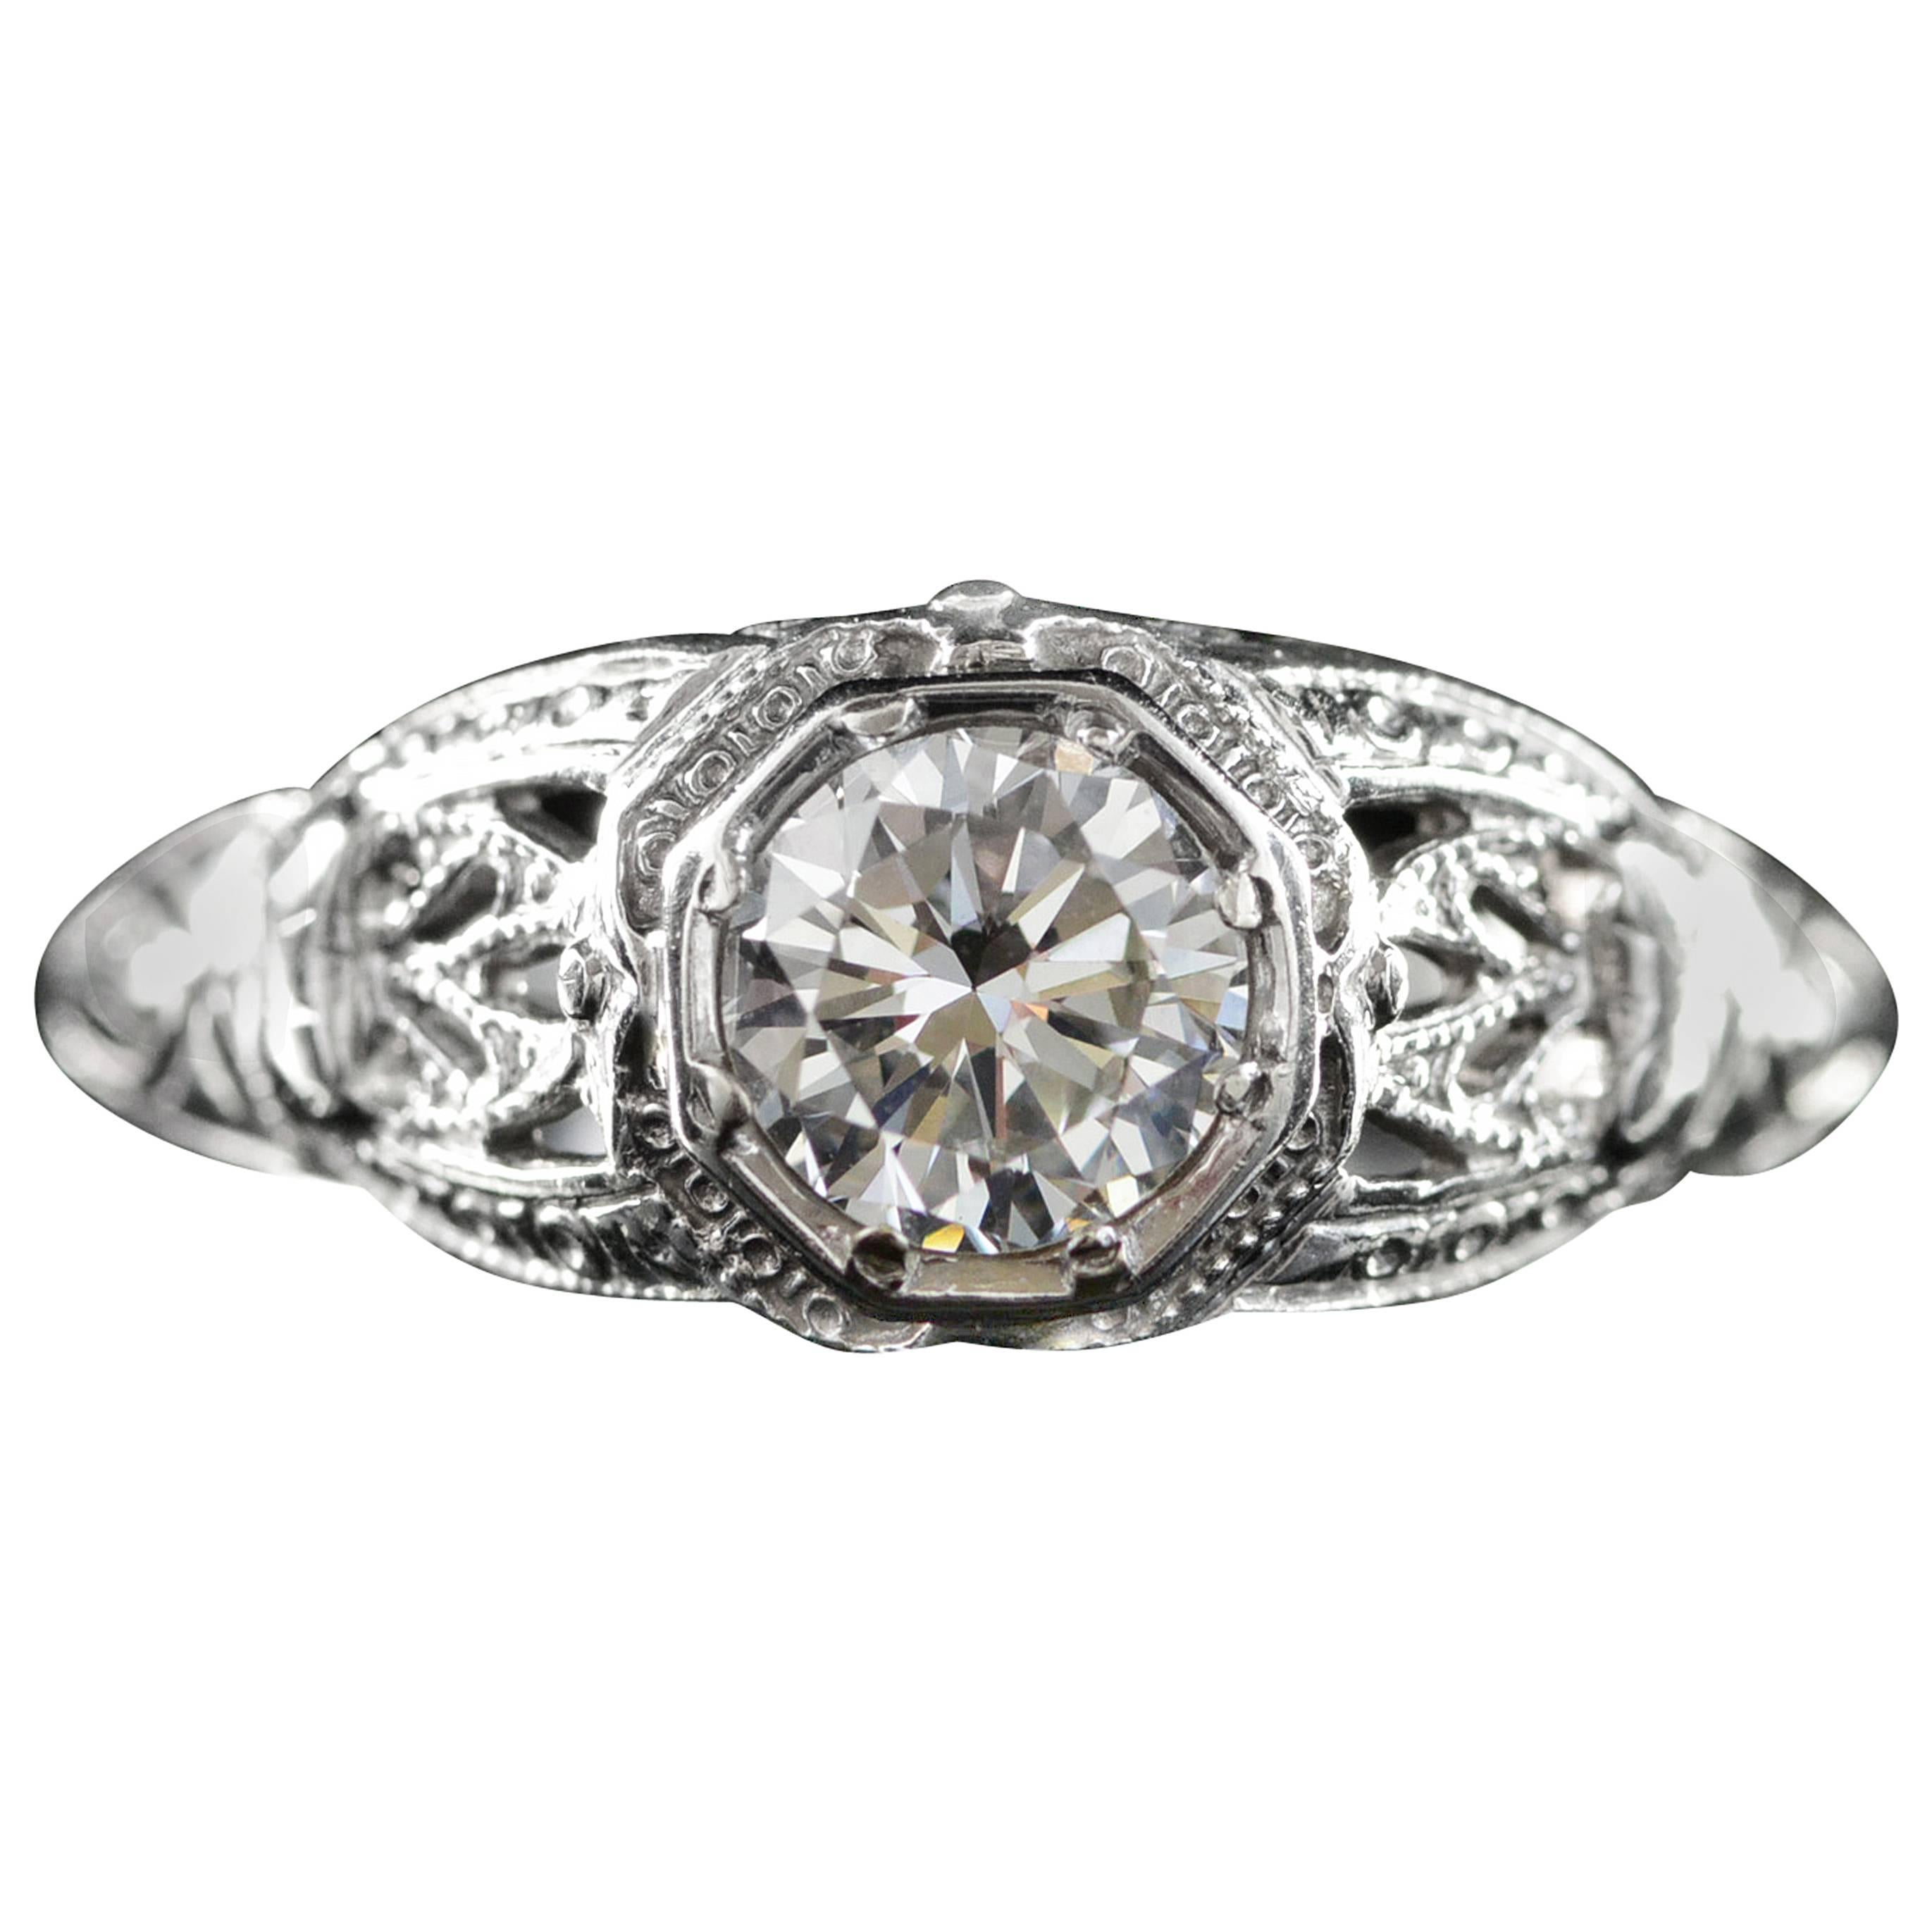 1920s Diamond Gold Filigree Solitaire Engagement Ring